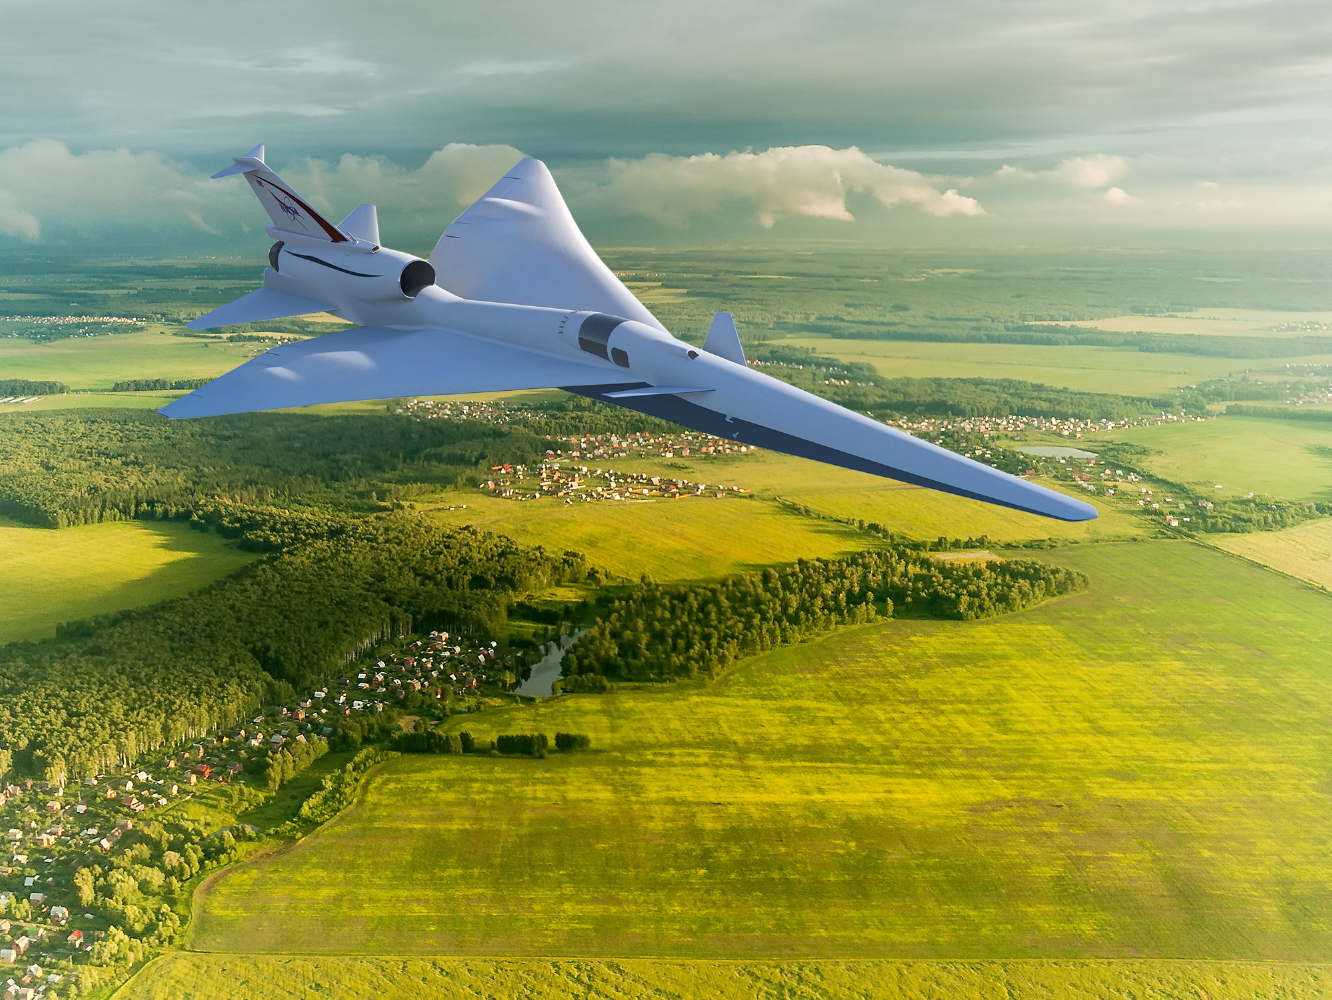 In several years, the X-59 Quiet SuperSonic Technology X-plane, or QueSST, will test its quiet supersonic technologies by flying